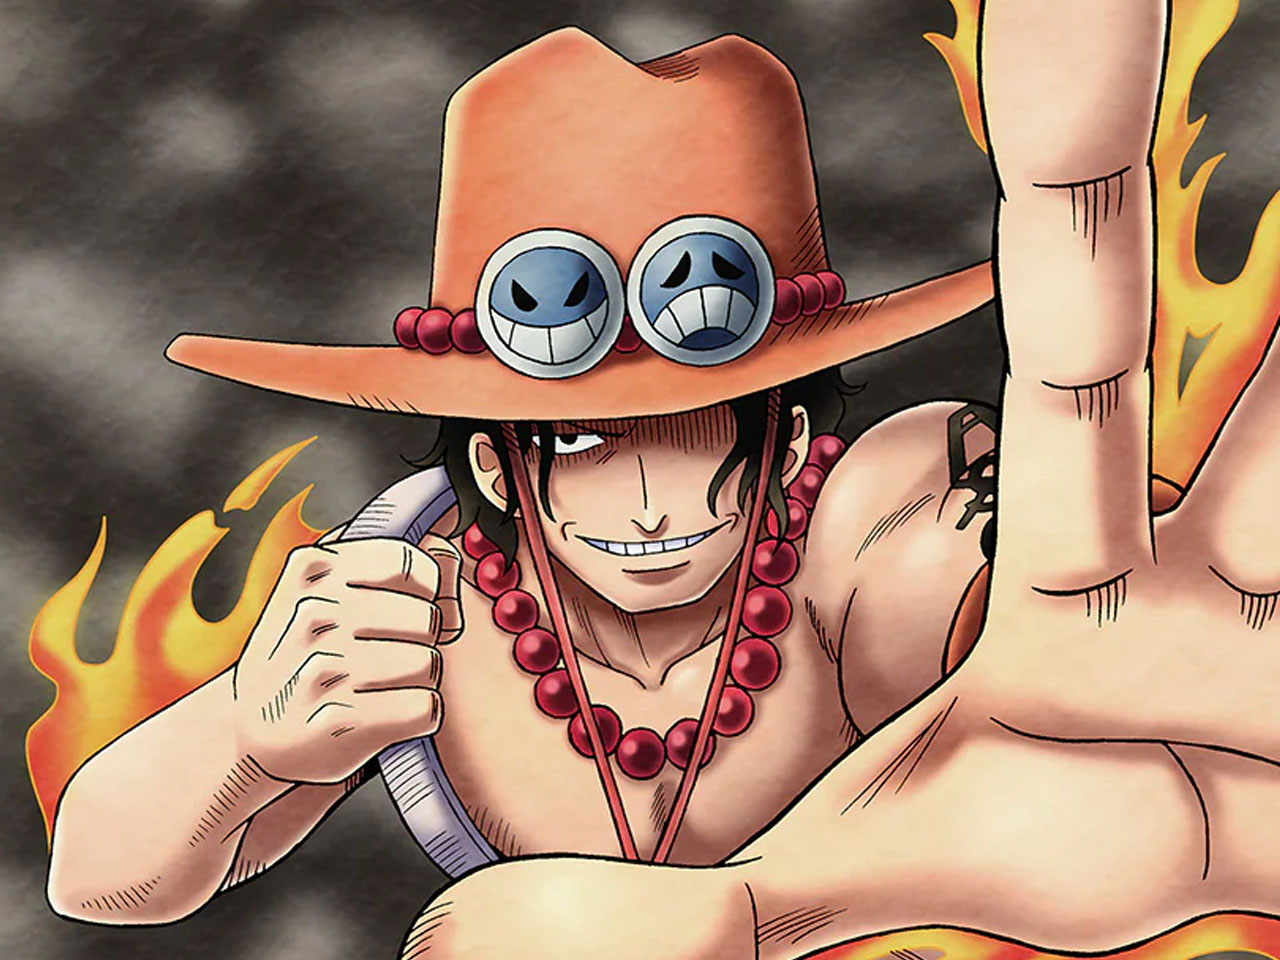 One Piece: Ace's Story Manga Gets US Release